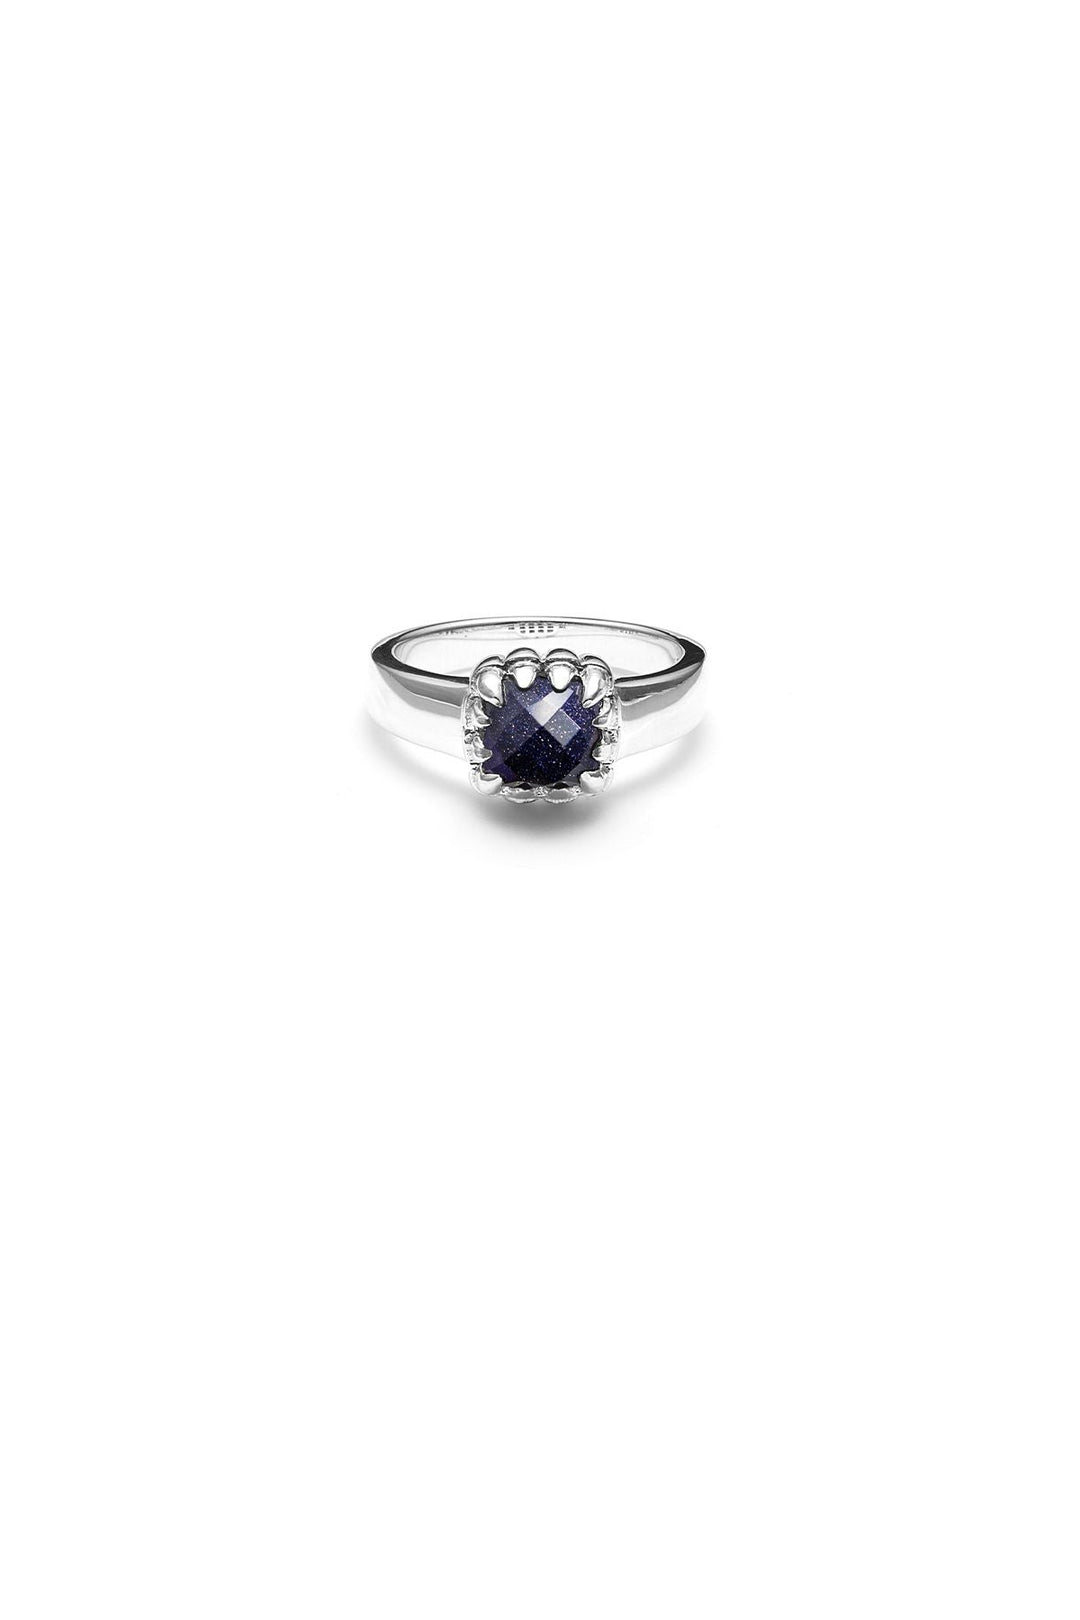 Galaxy Stone Baby Claw Ring - Chillis & More NZ